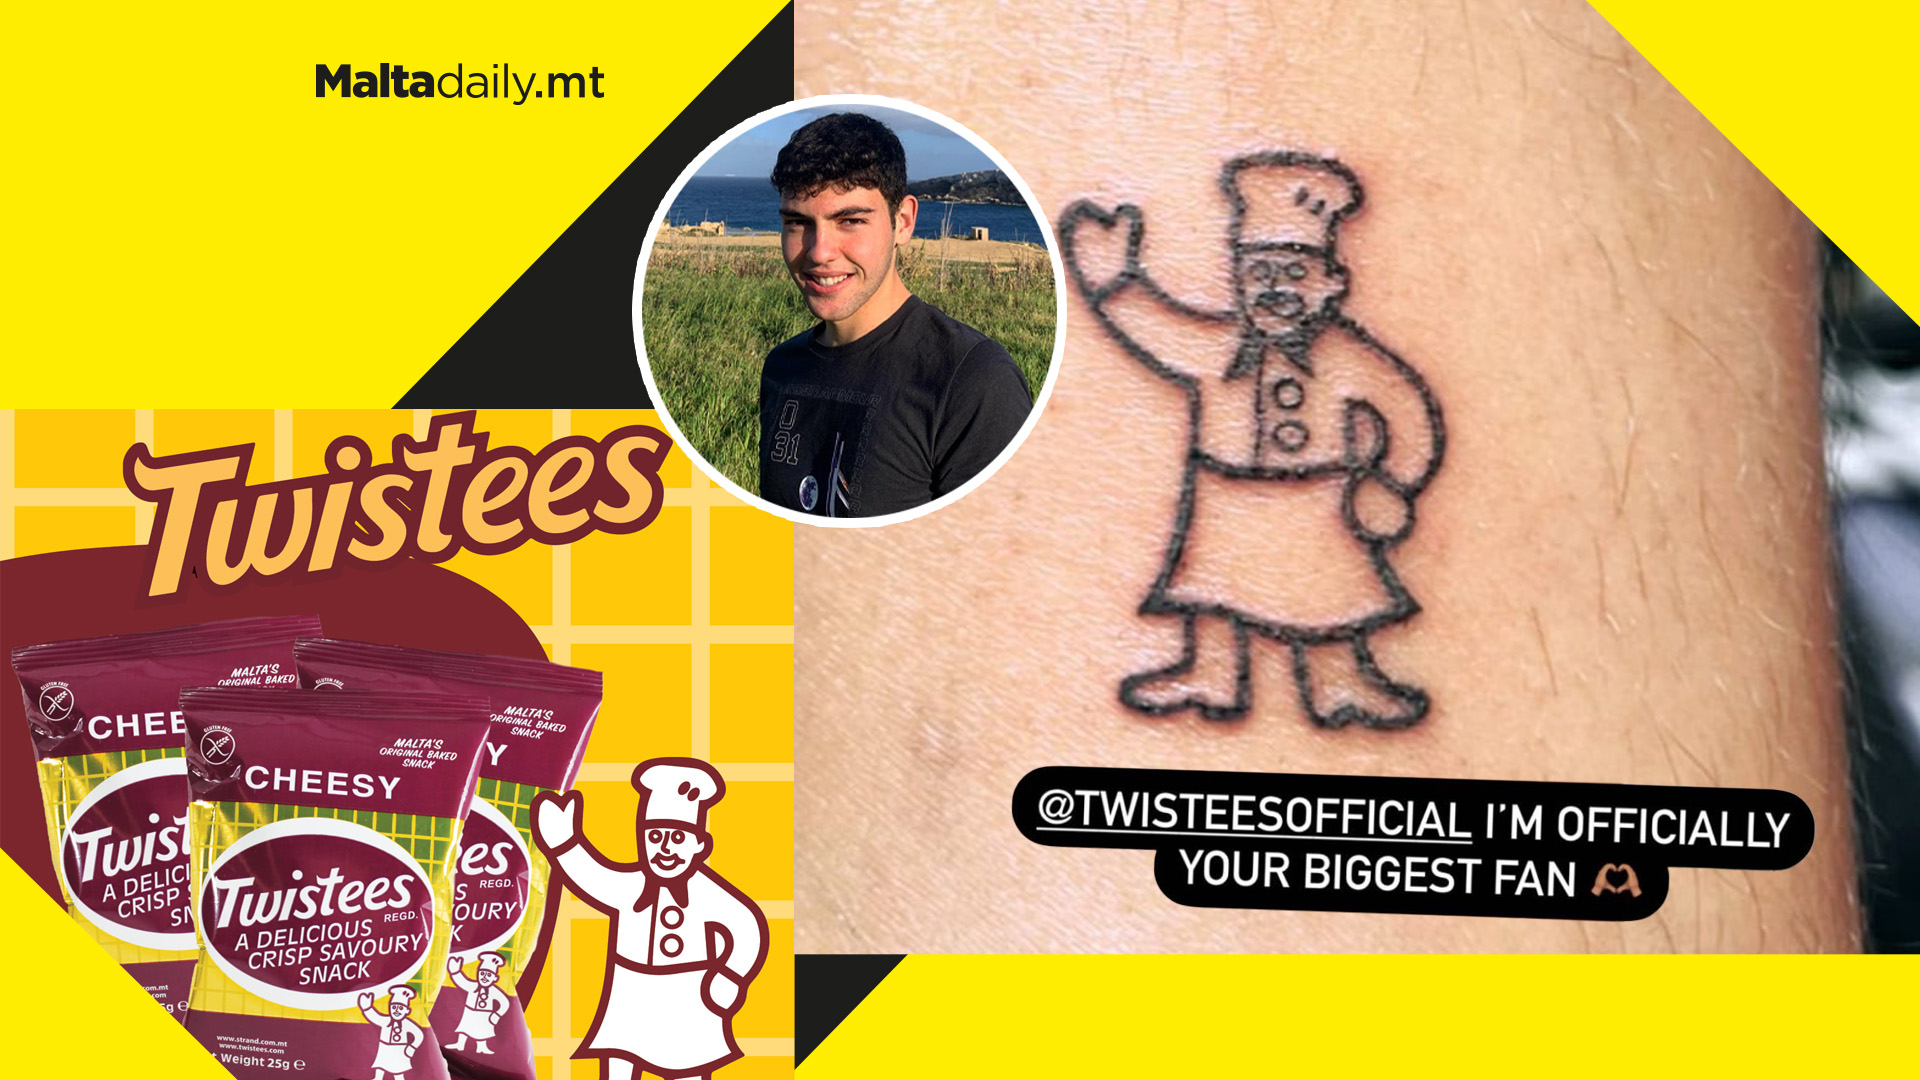 Maltese student tattoos Twistees logo on his whilst in Turkey